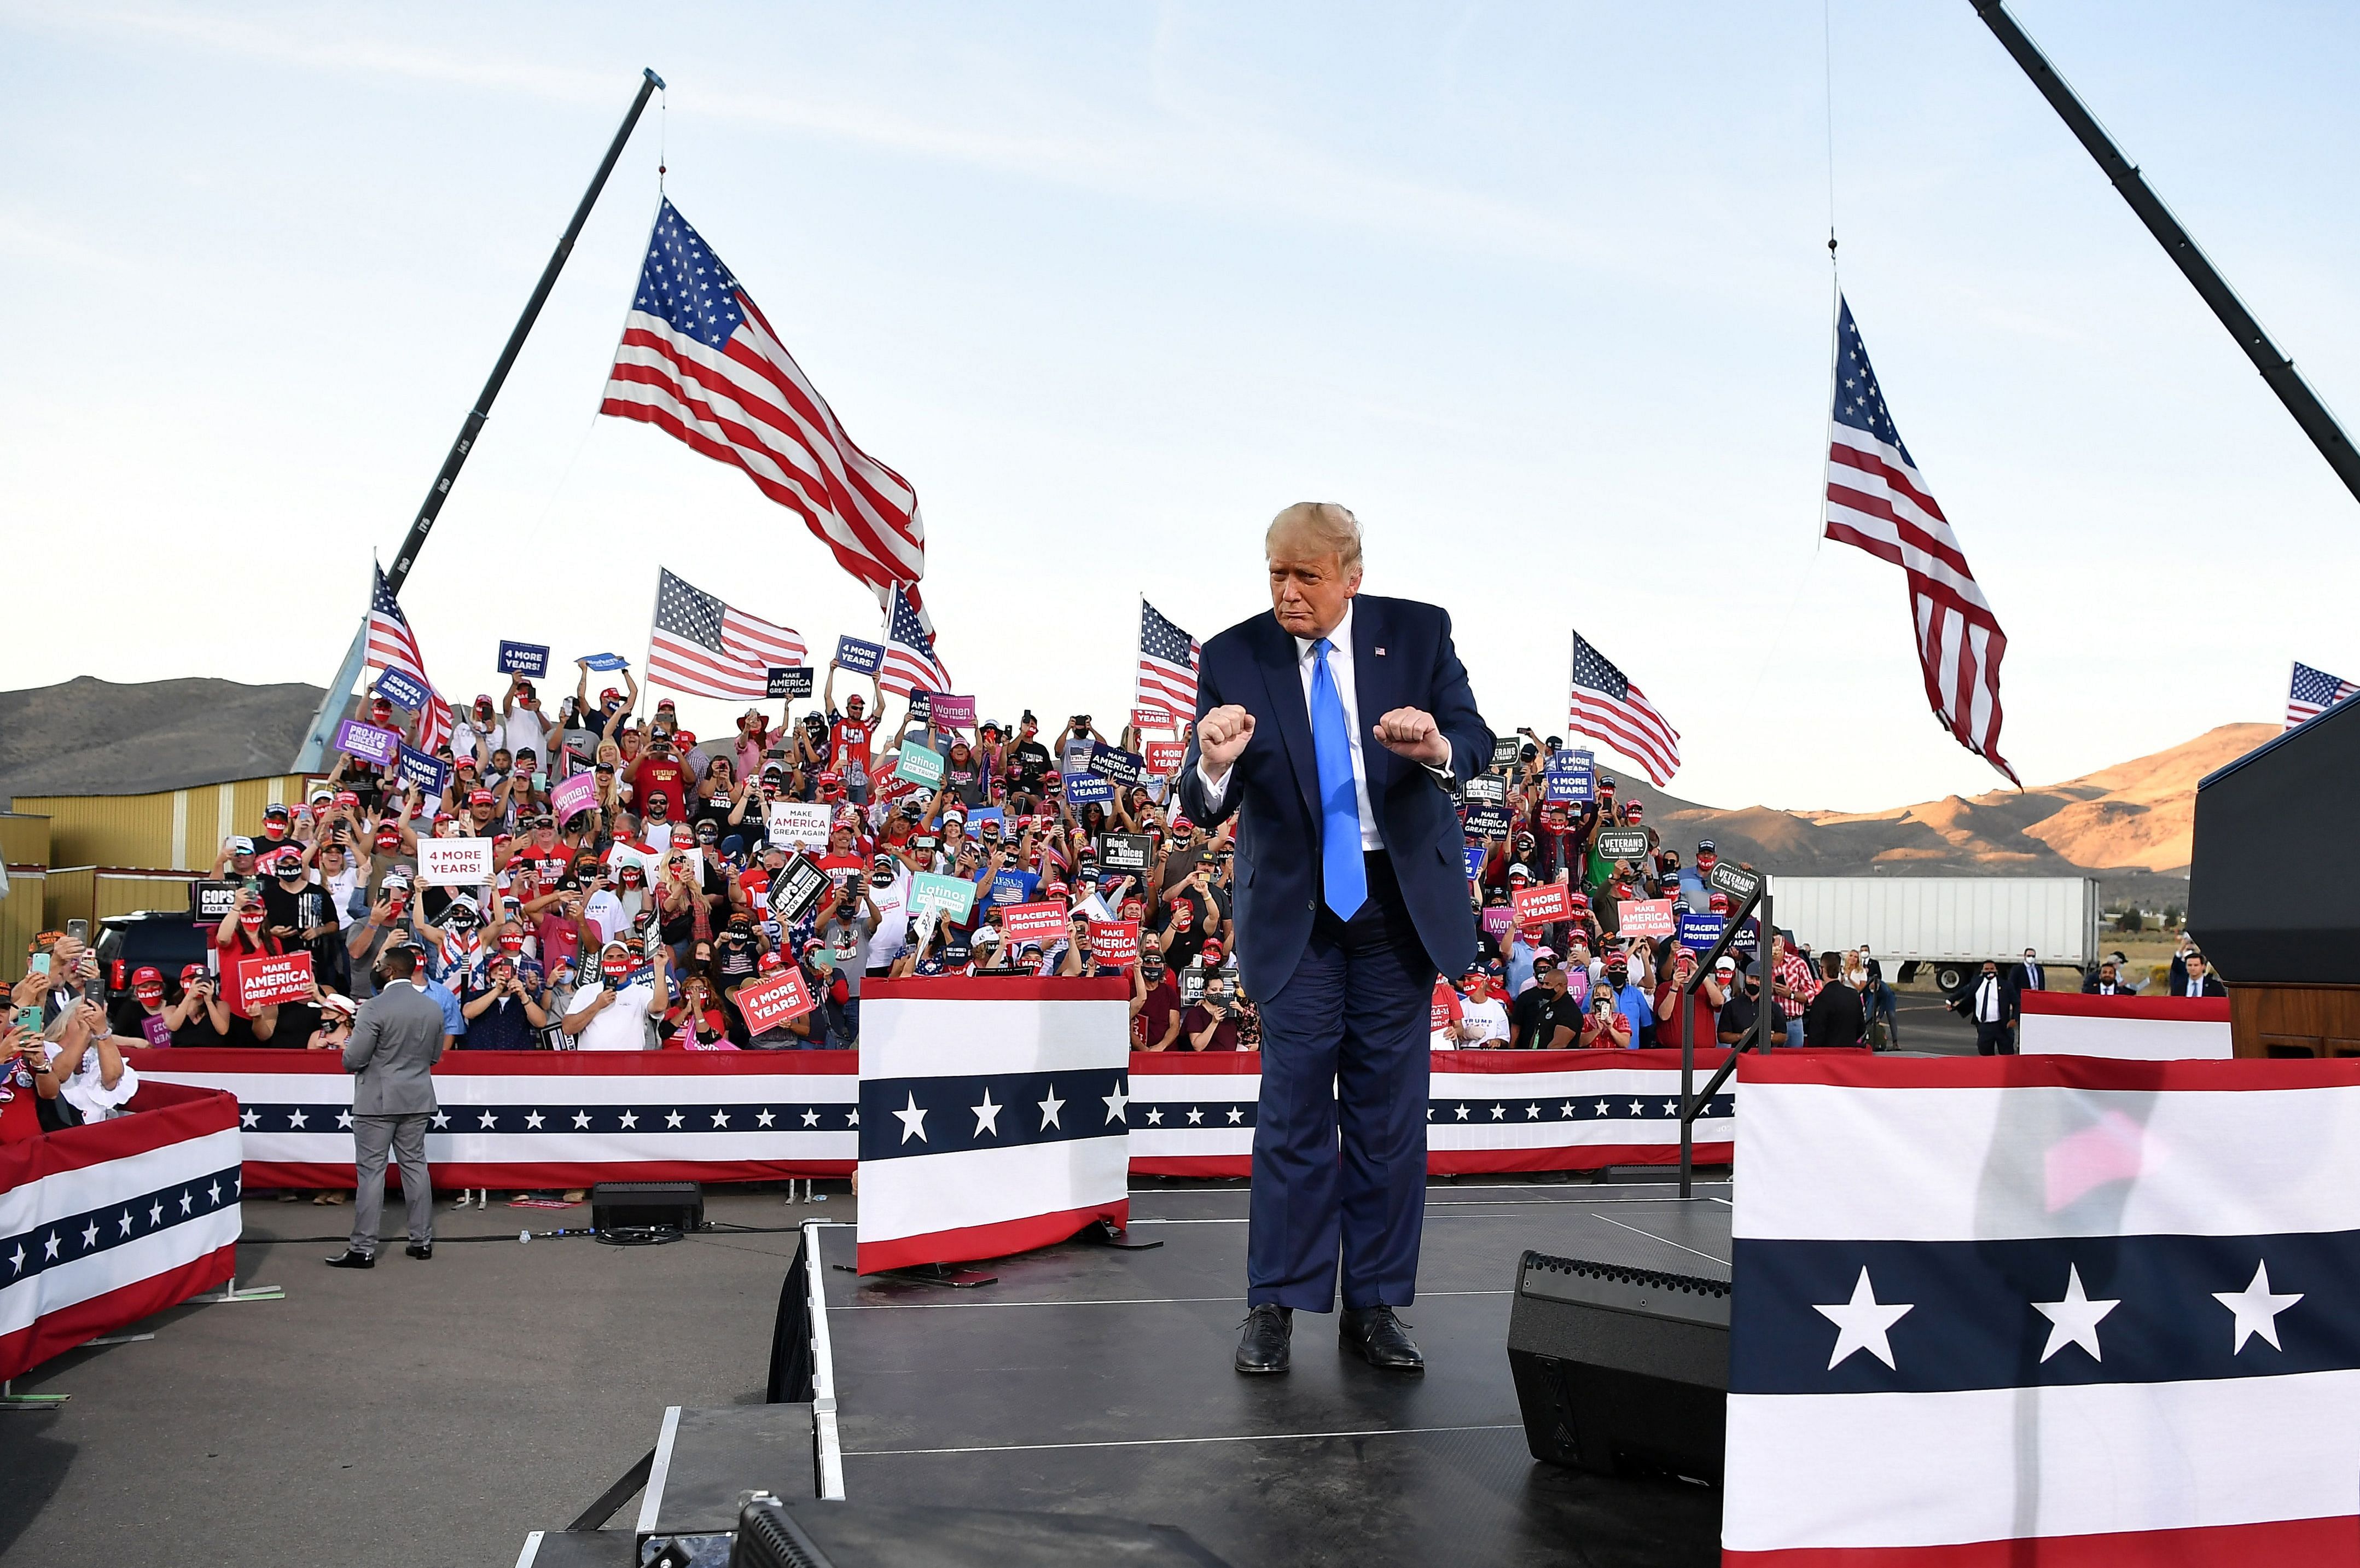 US President Donald Trump dances at the end of a rally at Carson City Airport in Carson City, Nevada. - US election day is quickly approaching, but this week has shown there's still plenty of time for dancing and video games on the campaign trail on October 18, 2020. Credit: AFP